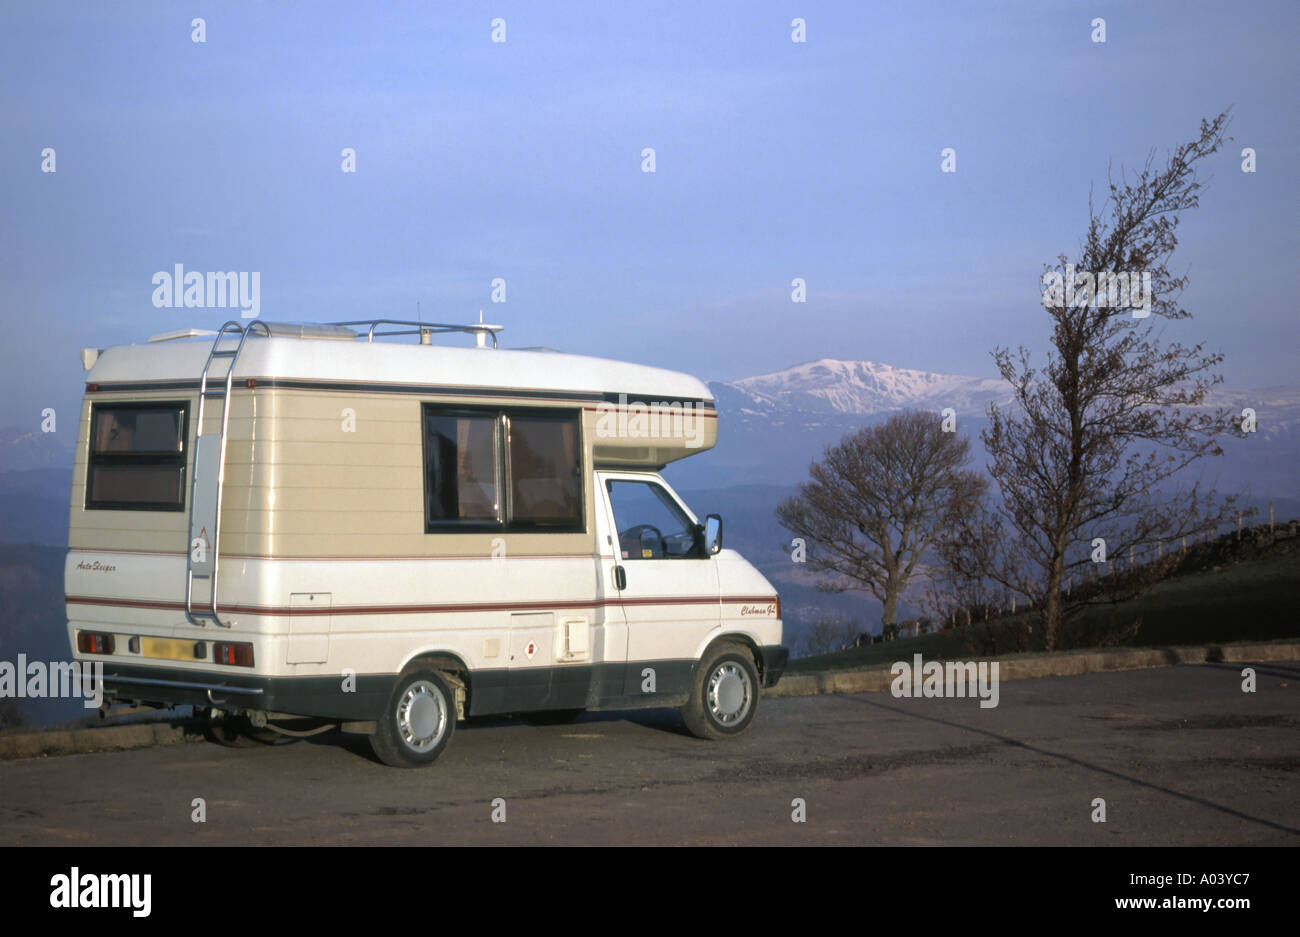 VW Volkswagen RV Auto Sleepers camper van motorhome winter touring in Snowdonia National Park snow capped mountains at Nebo Gwynedd North Wales UK Stock Photo